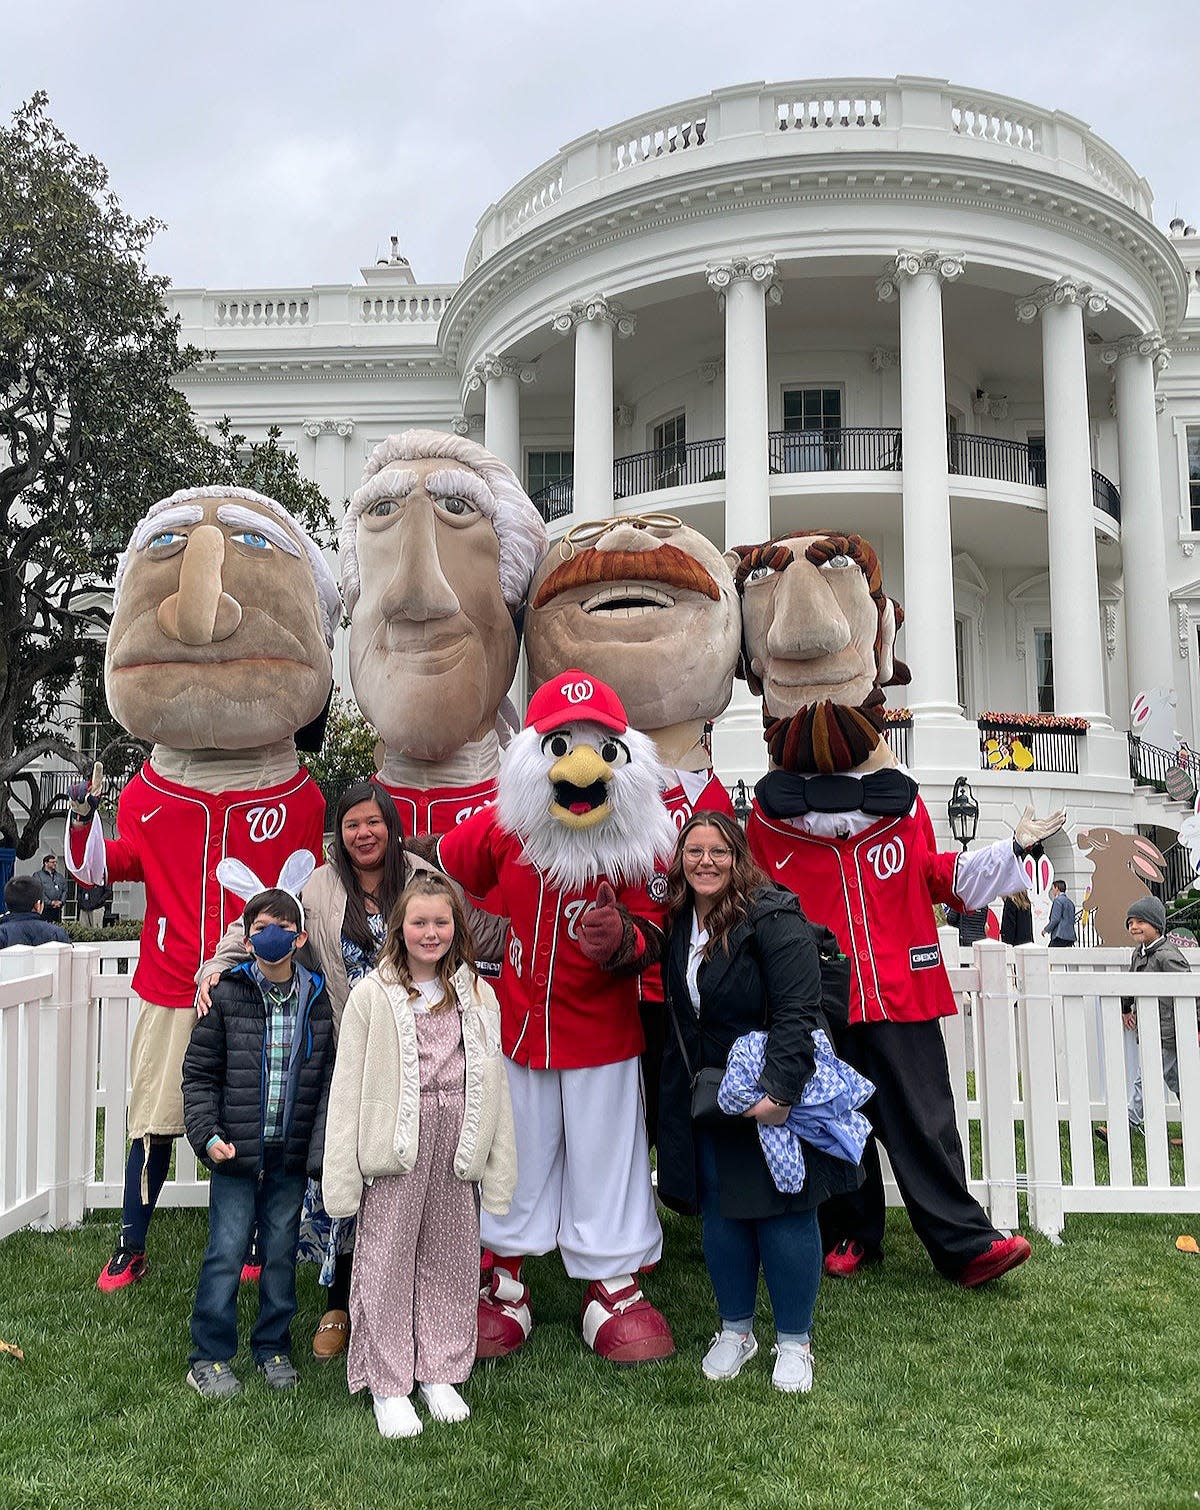 The annual White House Easter Egg Roll returned this year, drawing thousands to the nation's capitol for the annual event. Fremont residents Monica Ramirez,  at left, her son, Emerson Derome, Georgia Glovinsky, and her mother, Jessica Glovinsky, at right, traveled to Washington D.C. and took part in the event Monday morning.